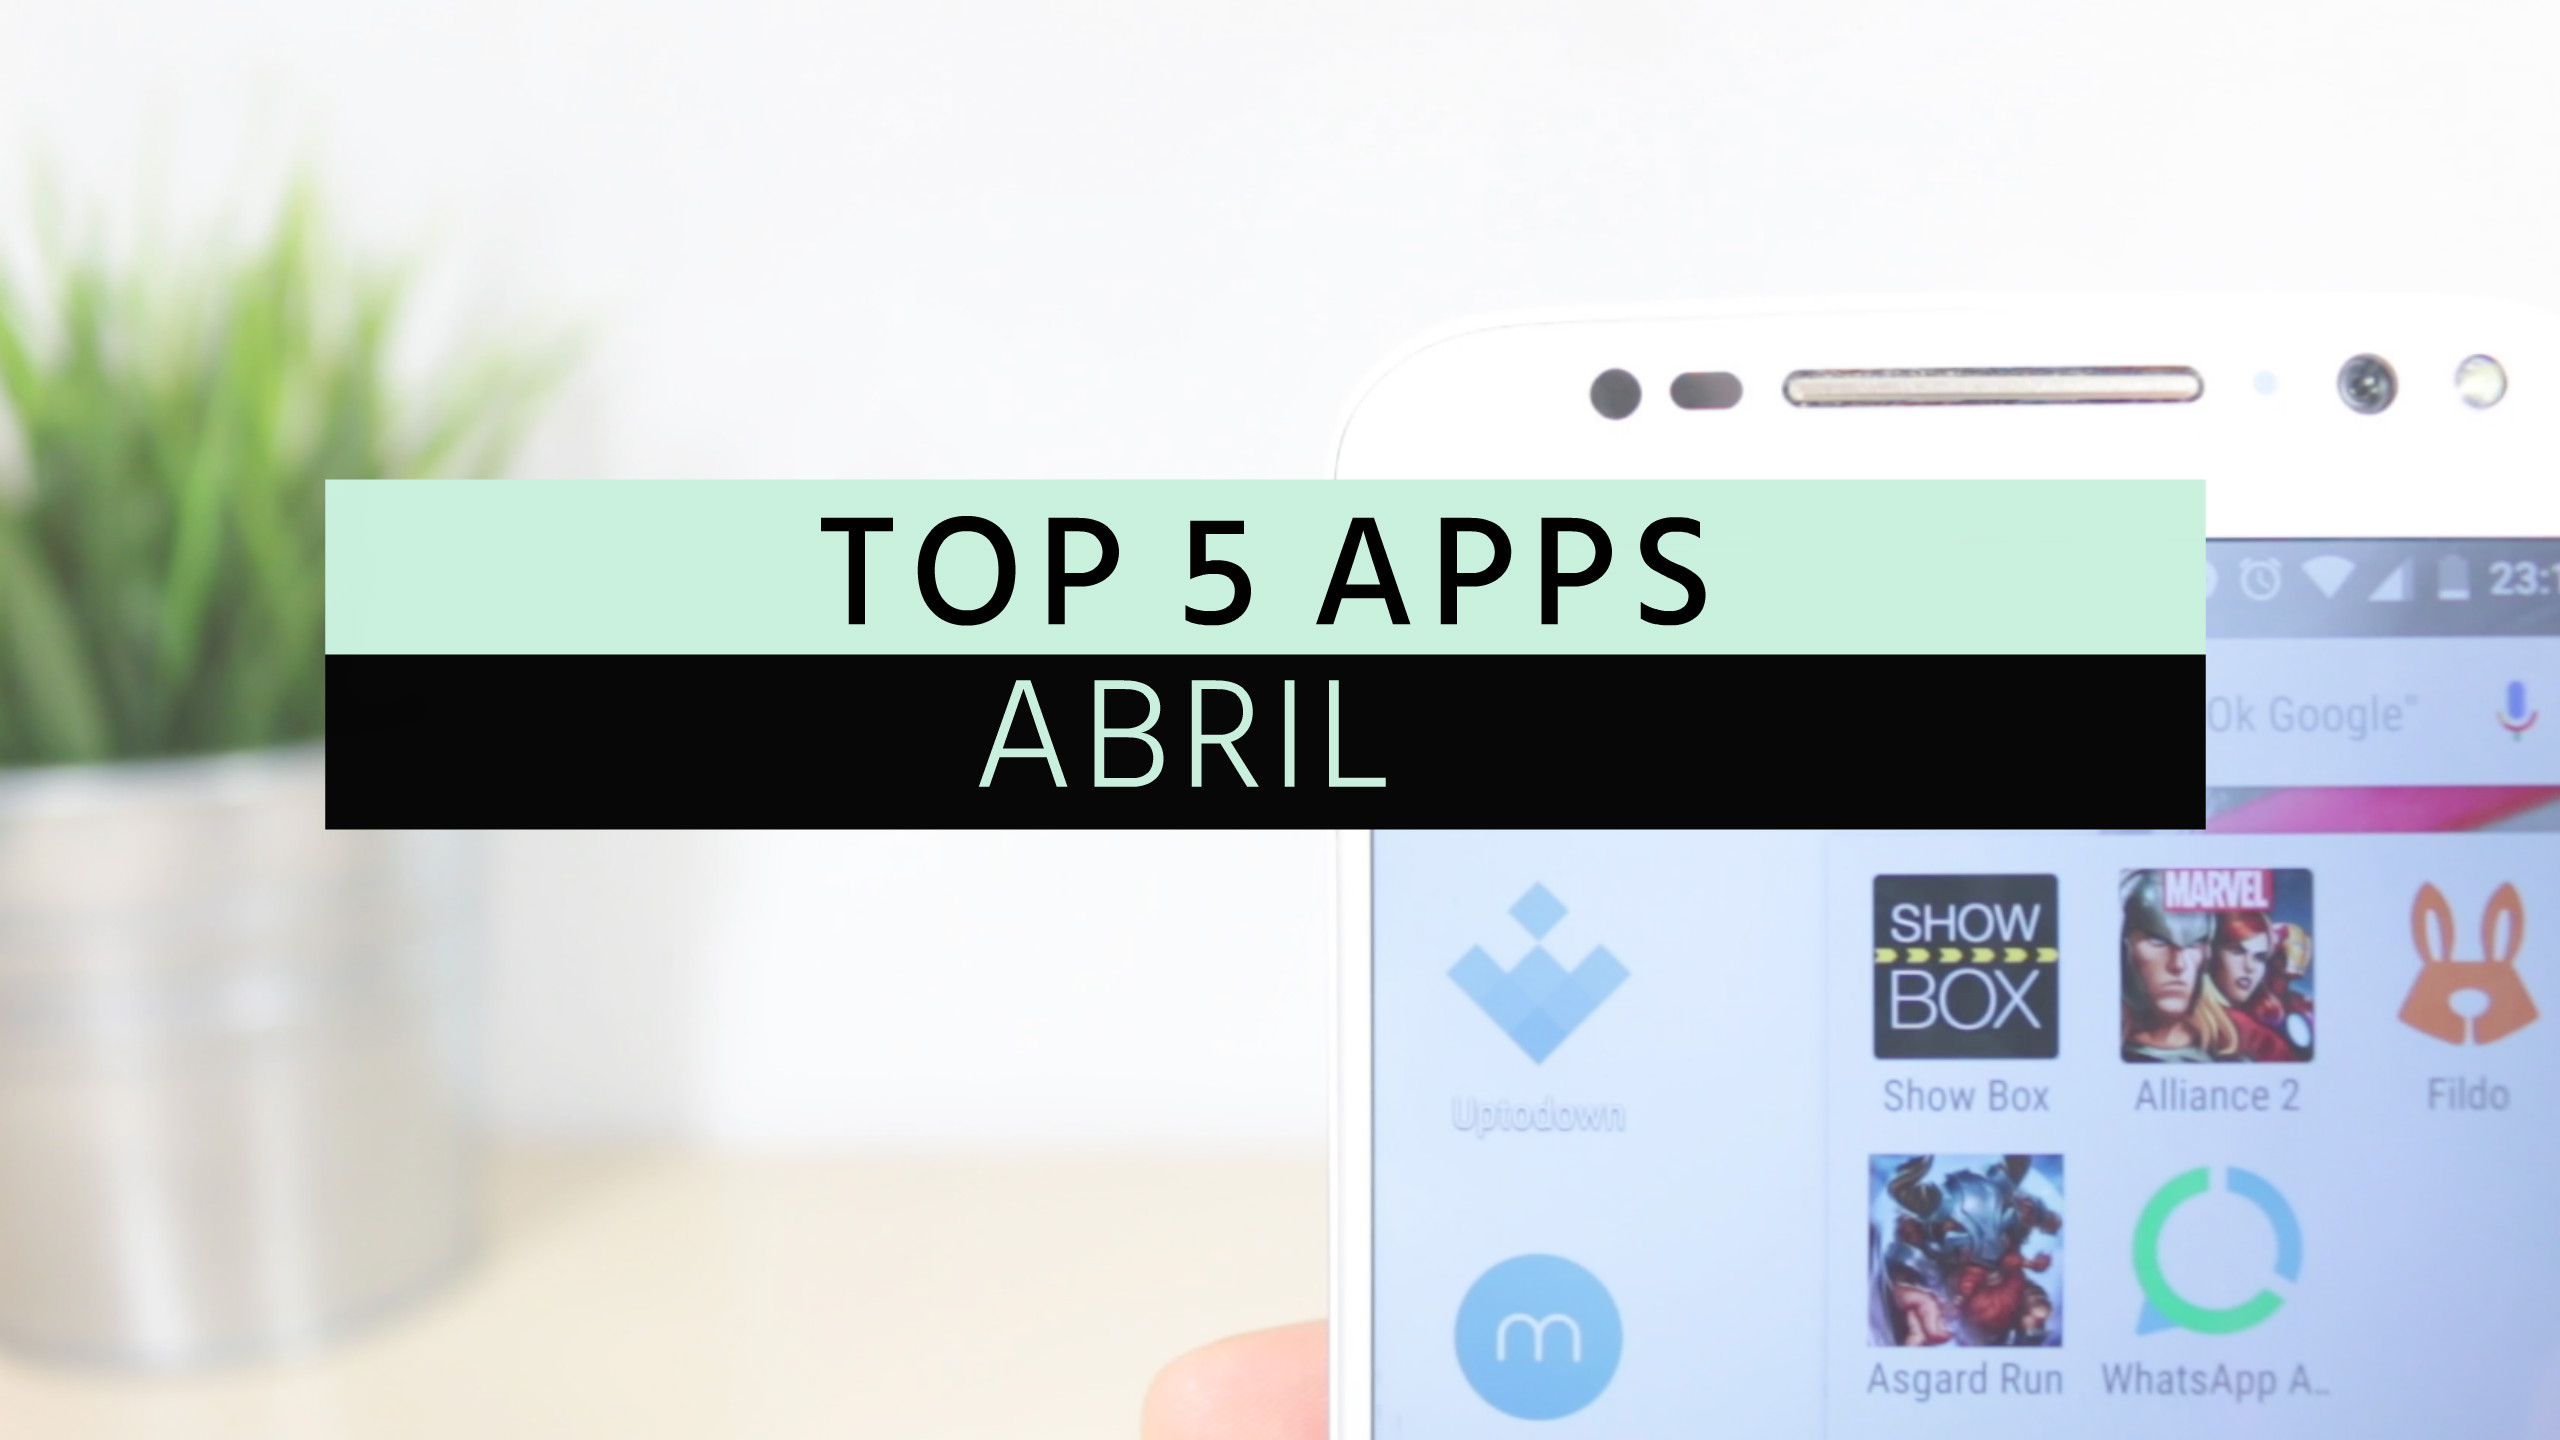 TOP APPS ABRIL